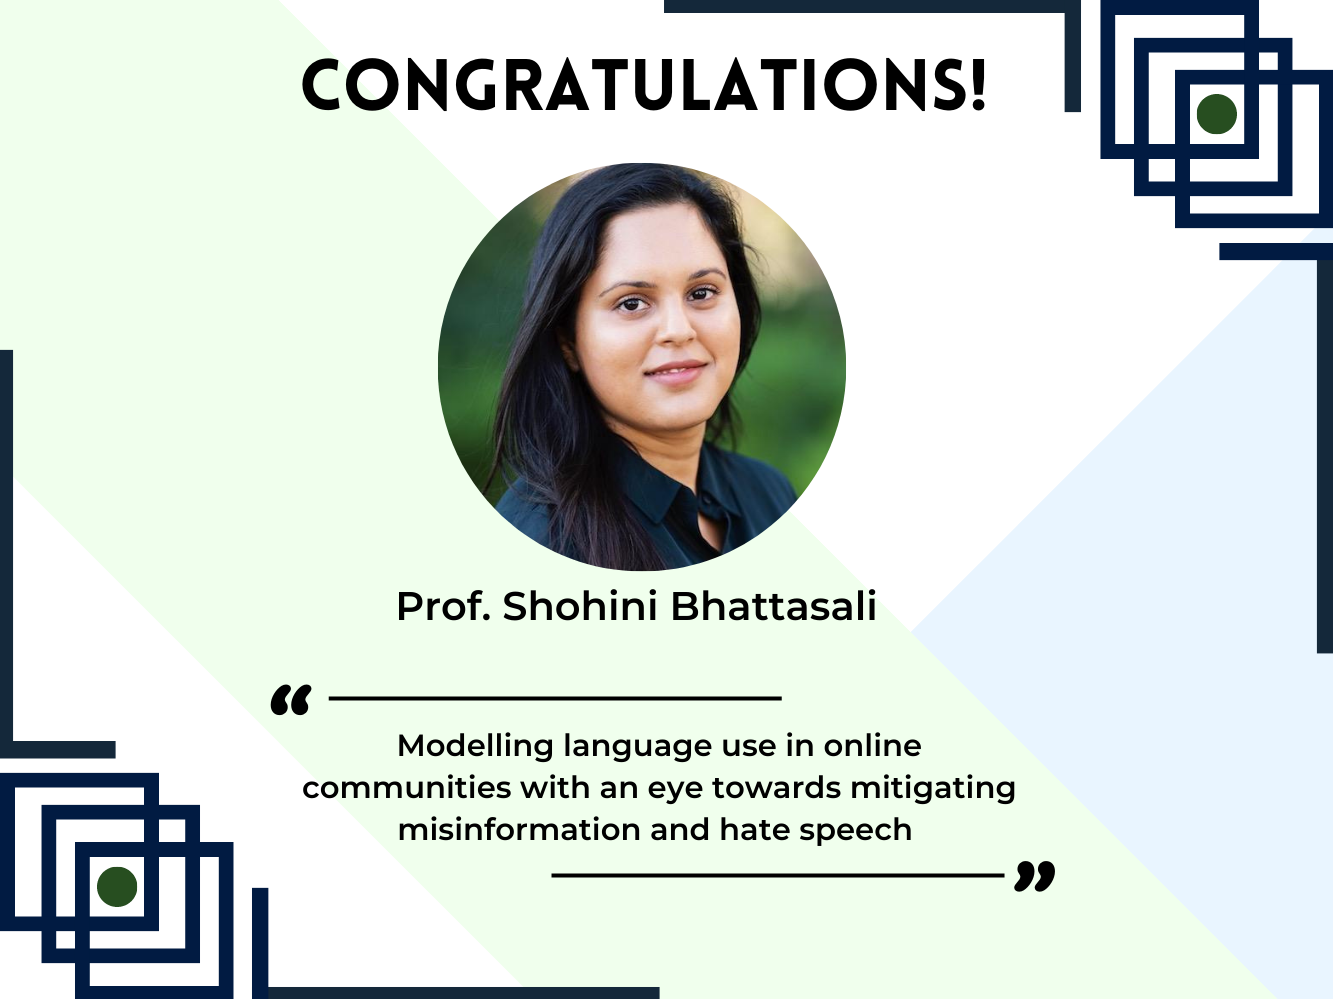 Prof. Shohini Bhattasali: modelling language use in online communities with an eye towards mitigating misinformation and hate speech